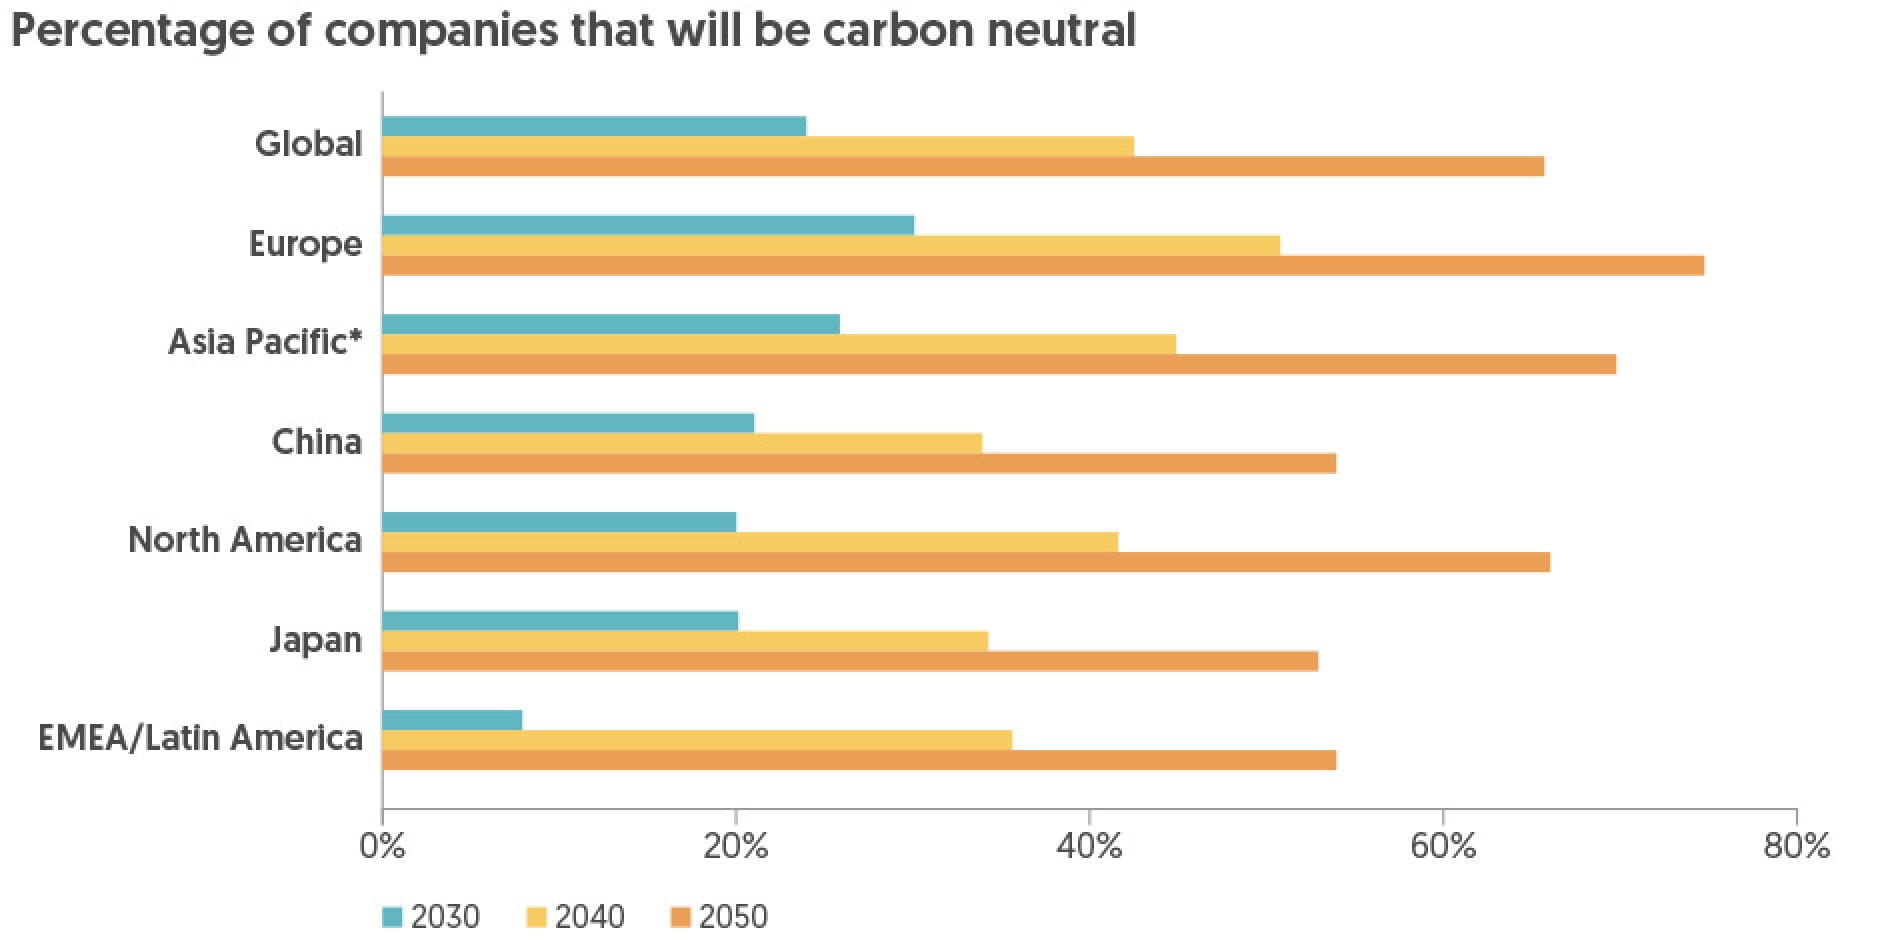 Percentage of companies going carbon neutral by 2050